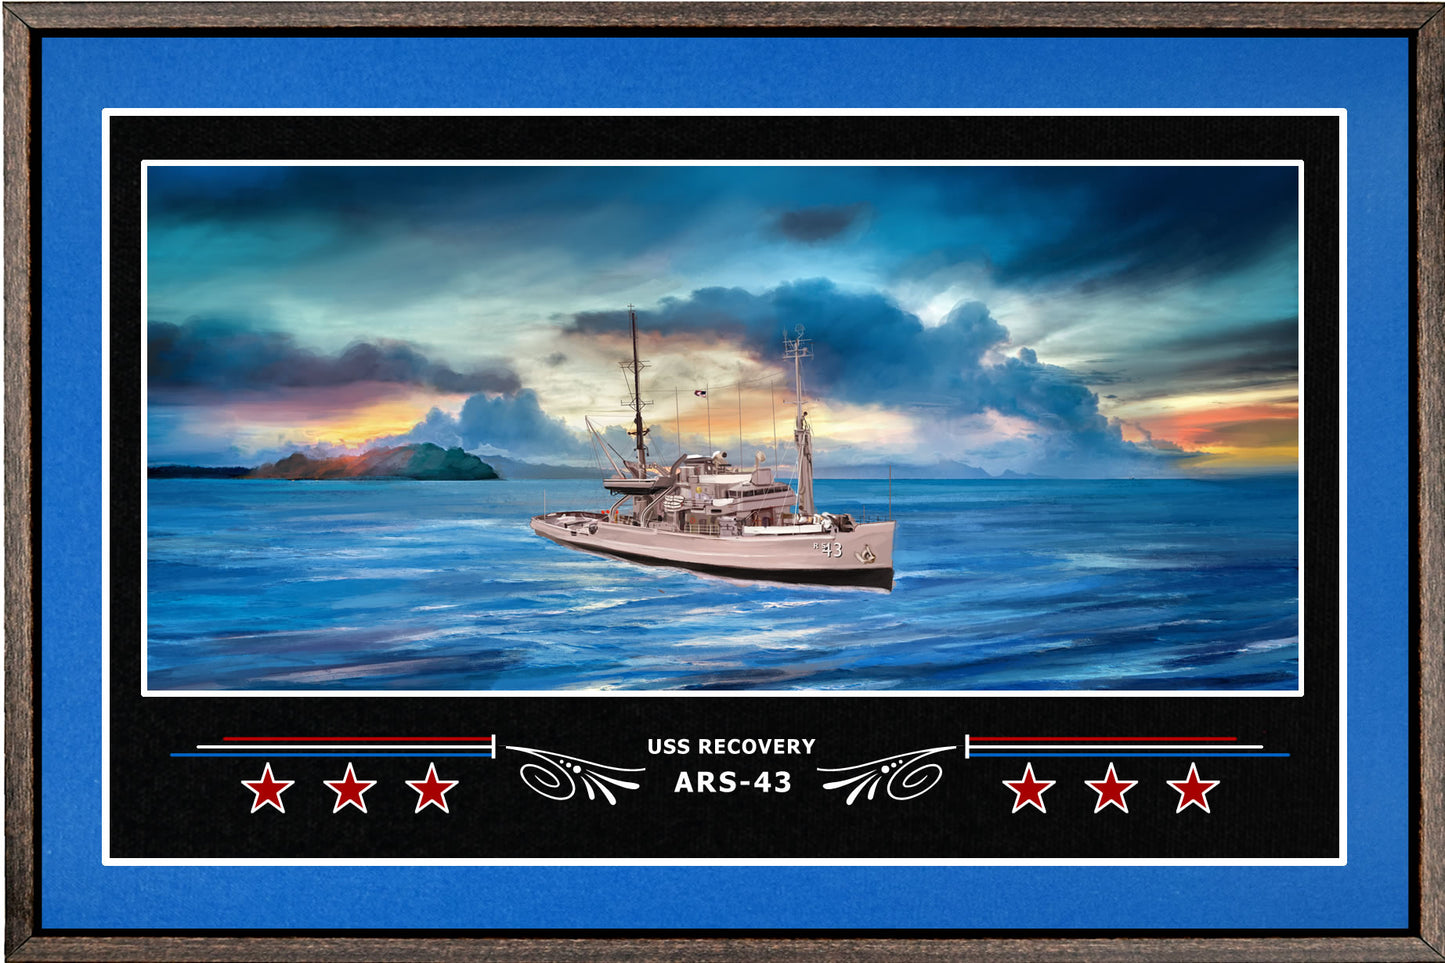 USS RECOVERY ARS 43 BOX FRAMED CANVAS ART BLUE